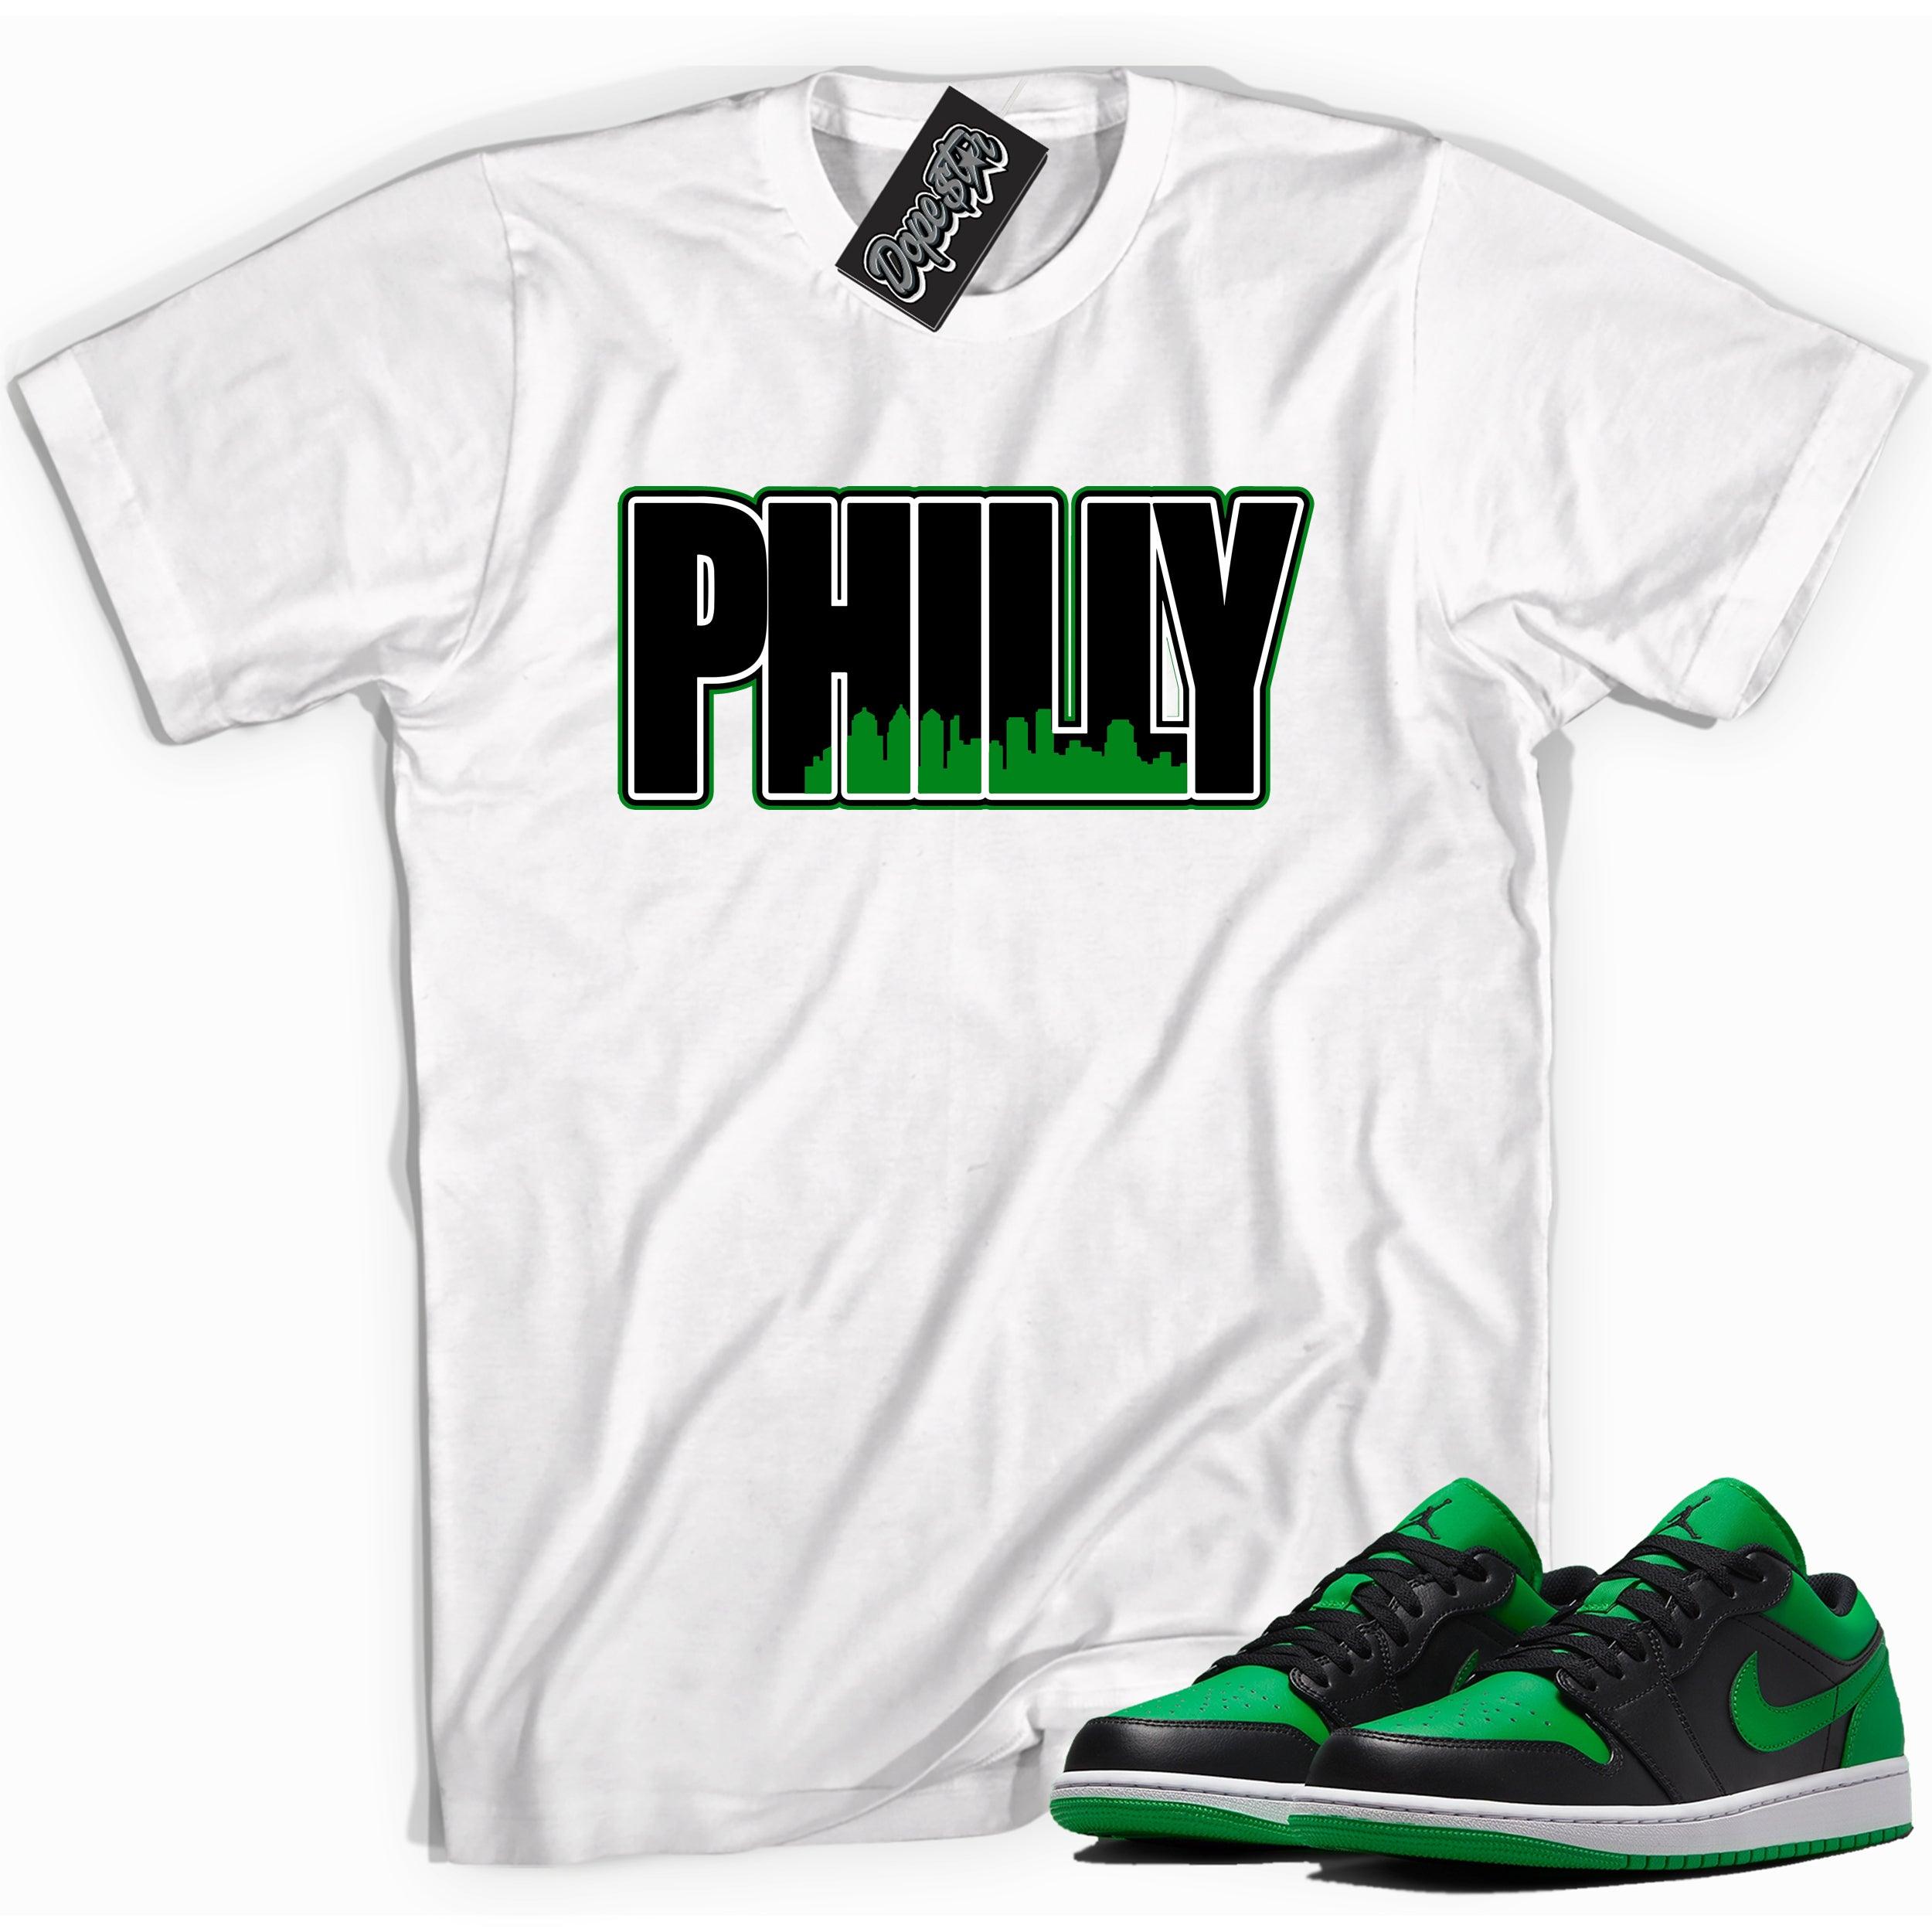 Cool white graphic tee with 'Philly' print, that perfectly matches Air Jordan 1 Low Lucky Green sneakers